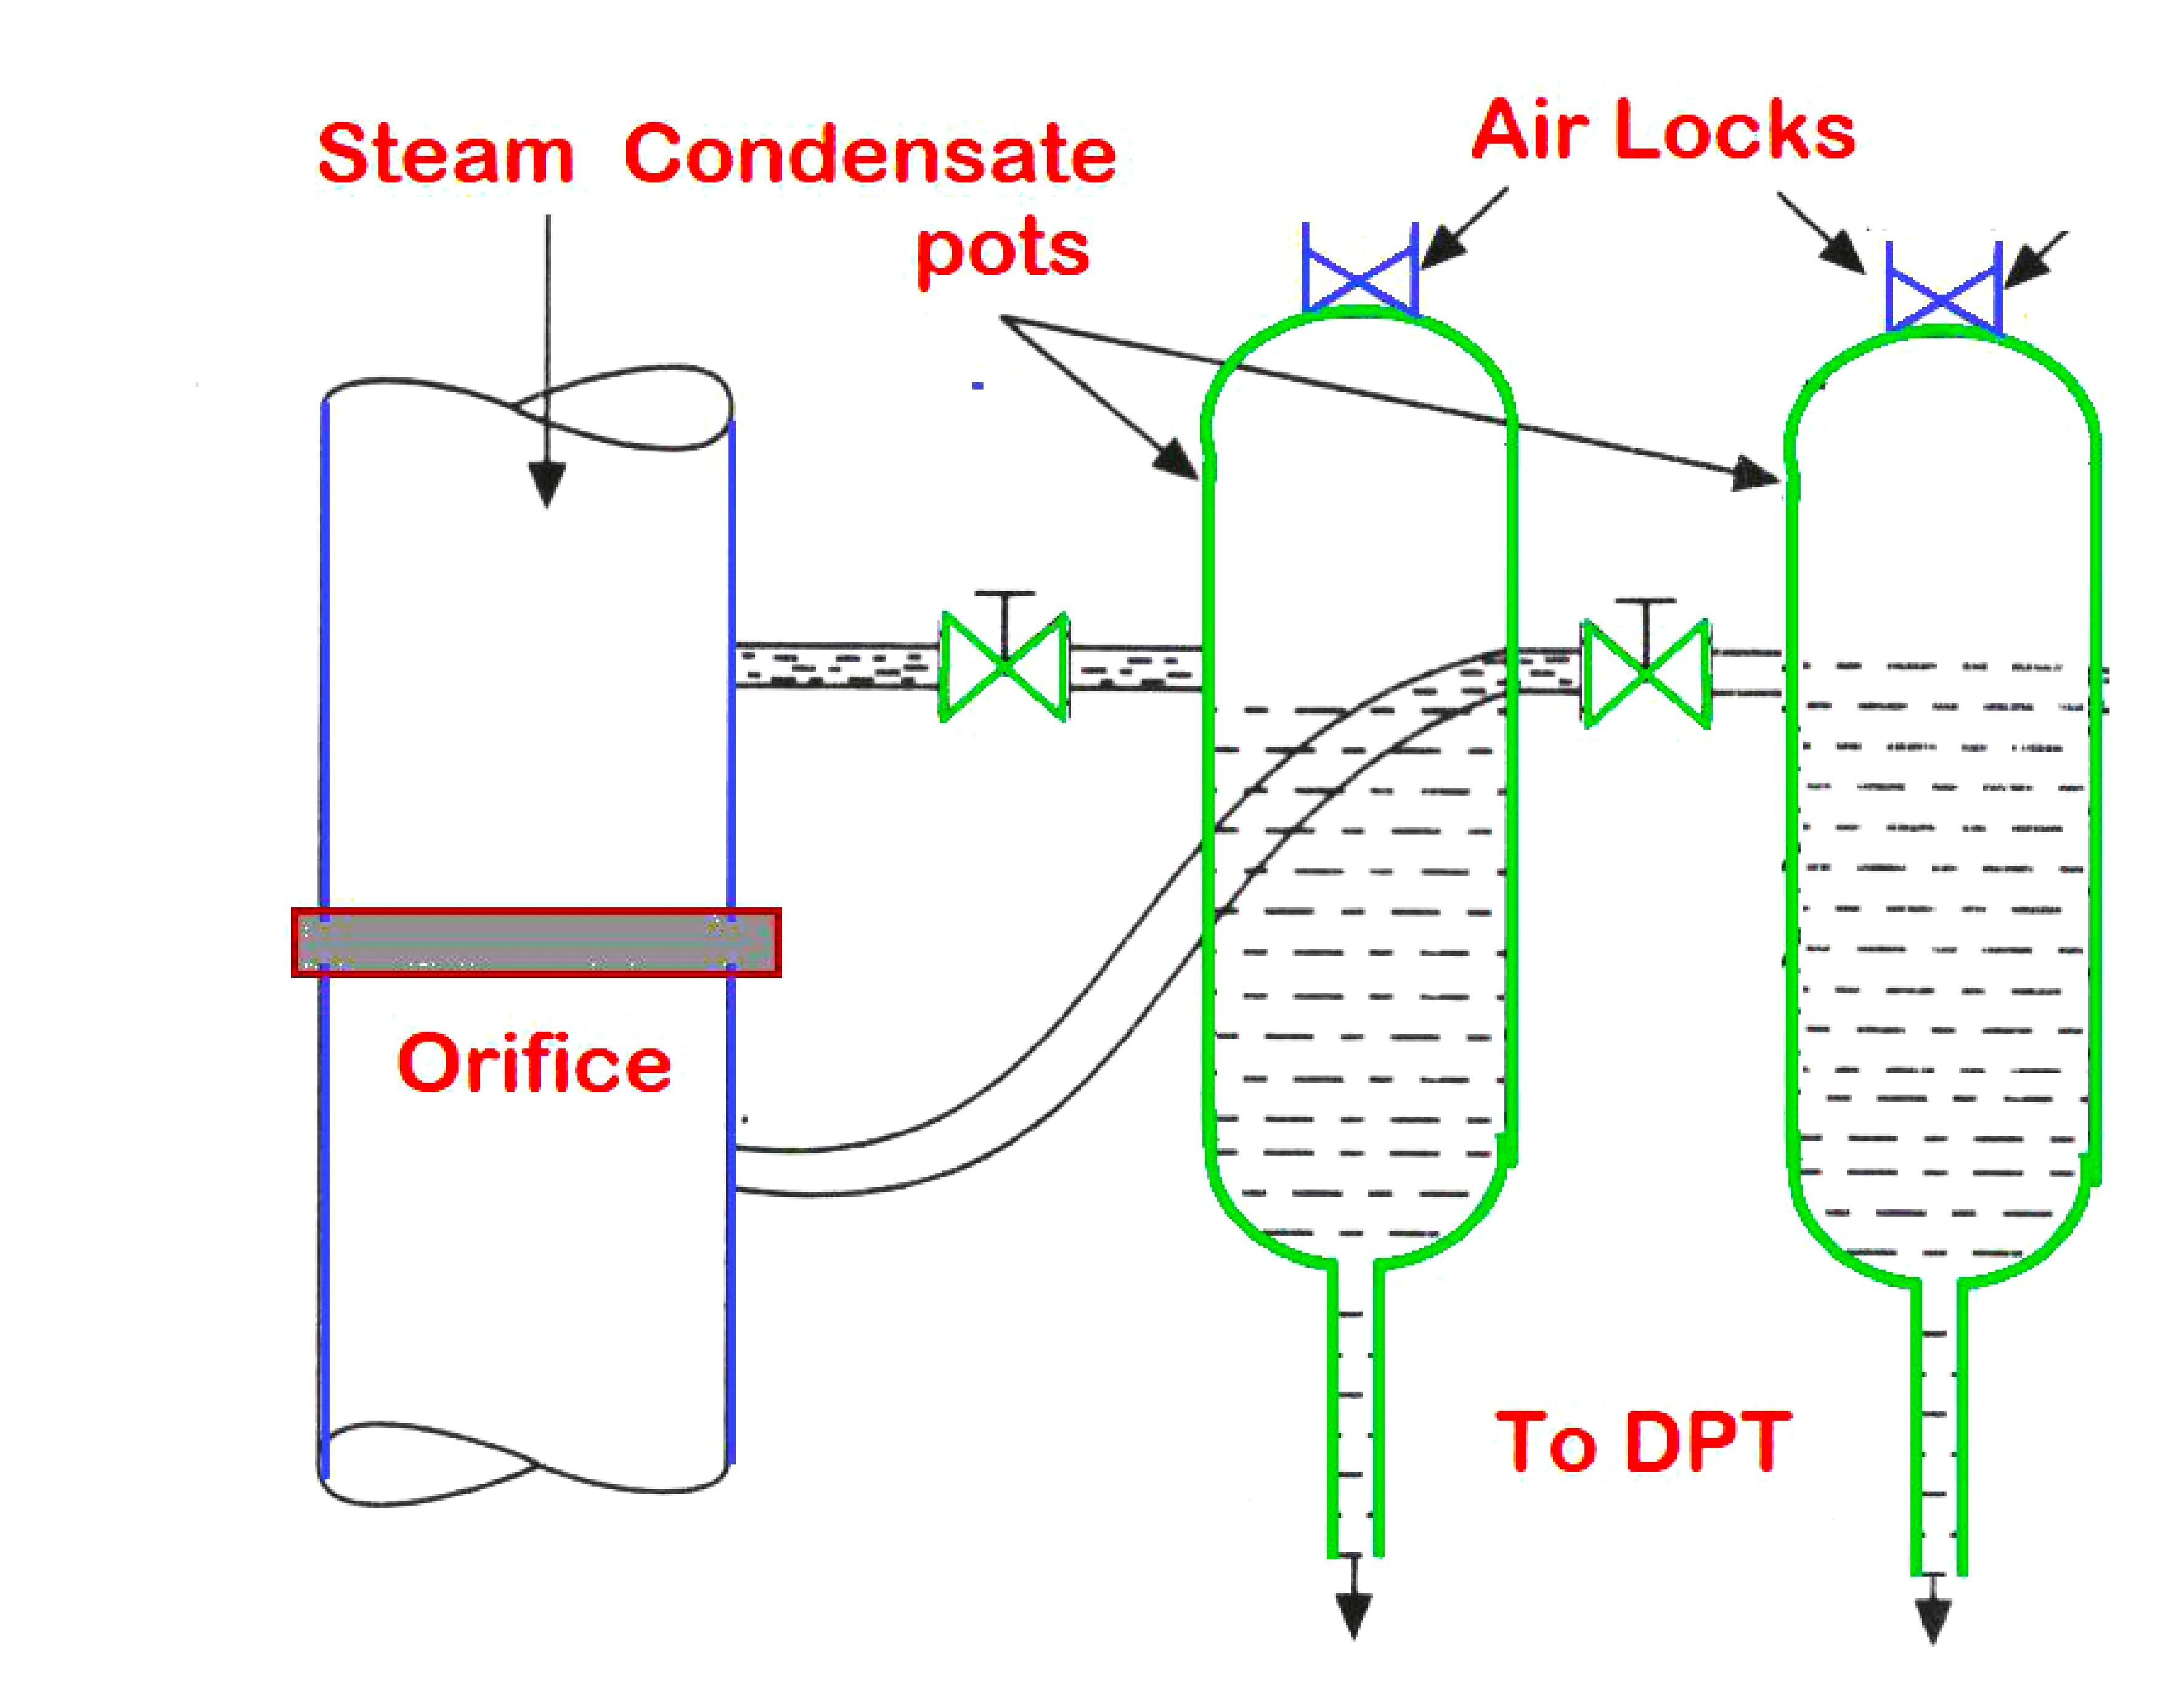 Applications of condensate pot